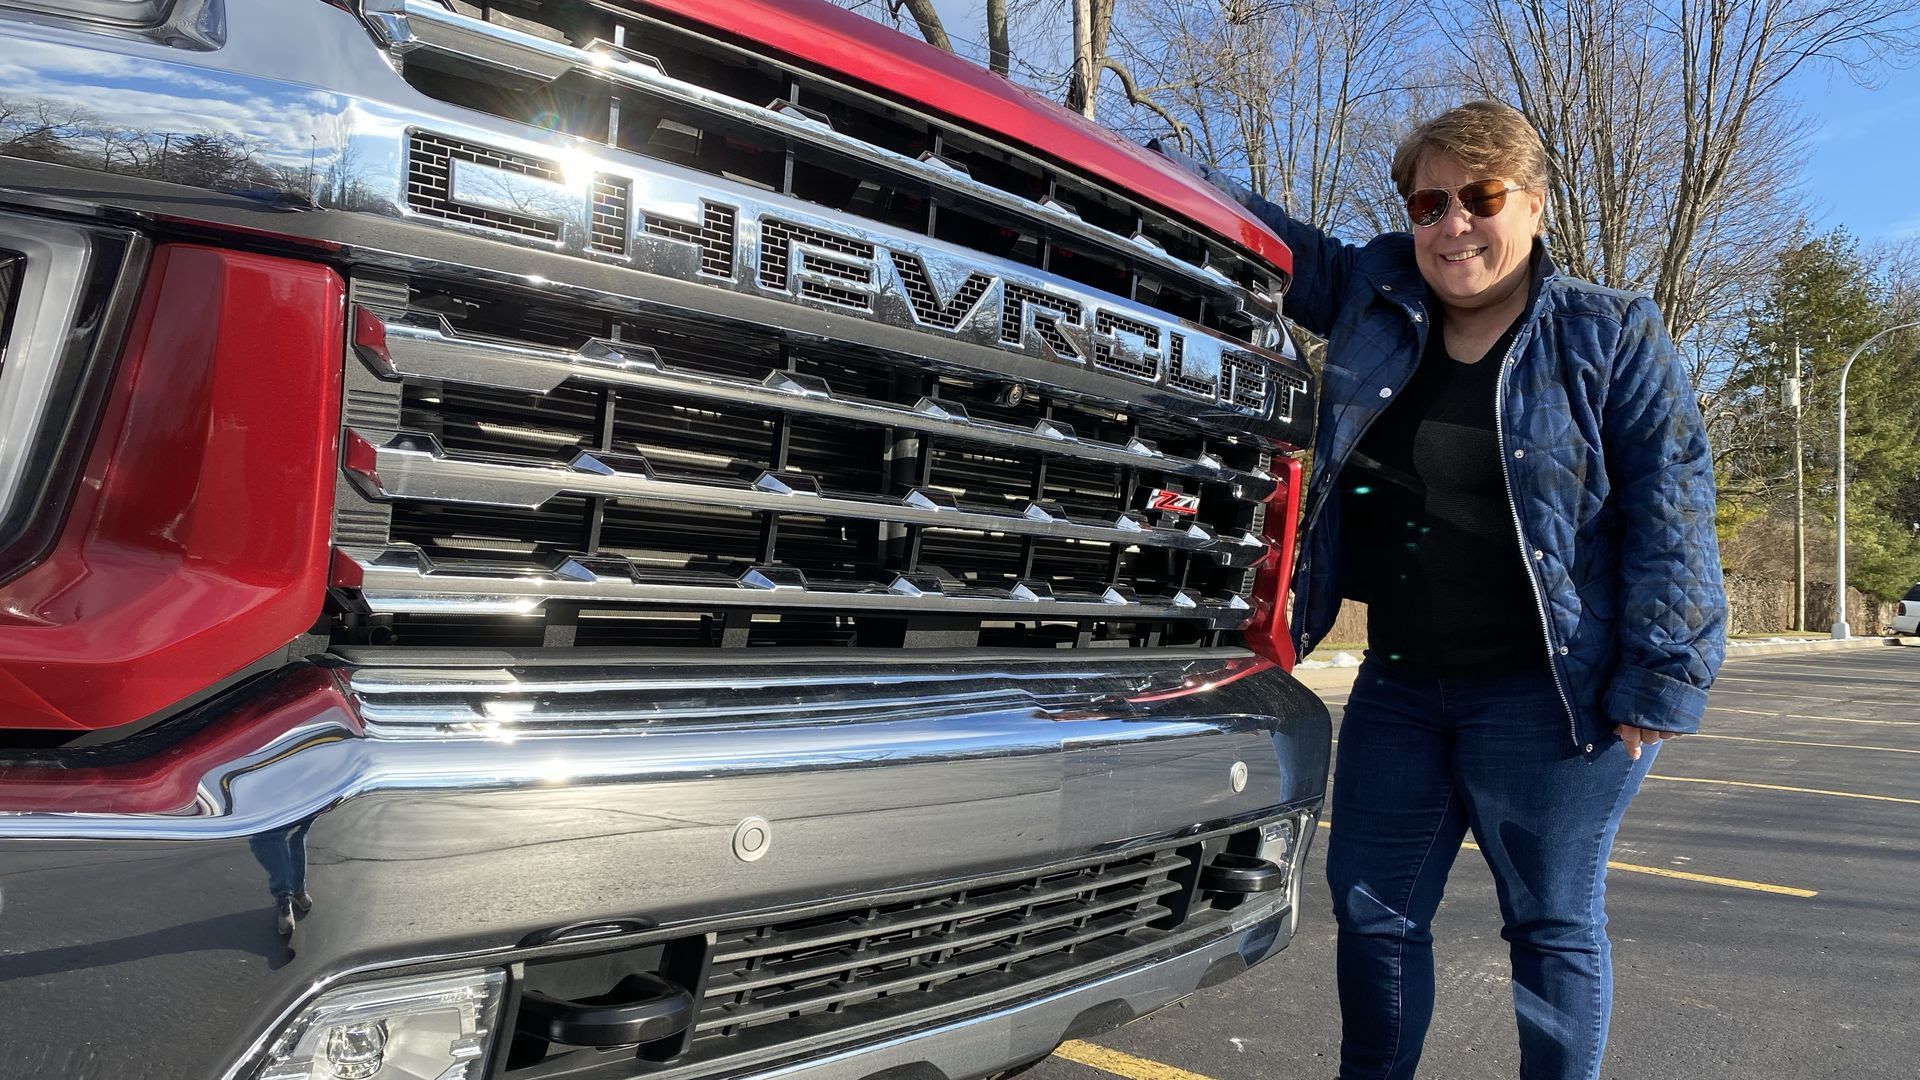 Writer Joann Muller standing next to the vehicle, which is taller than her. 